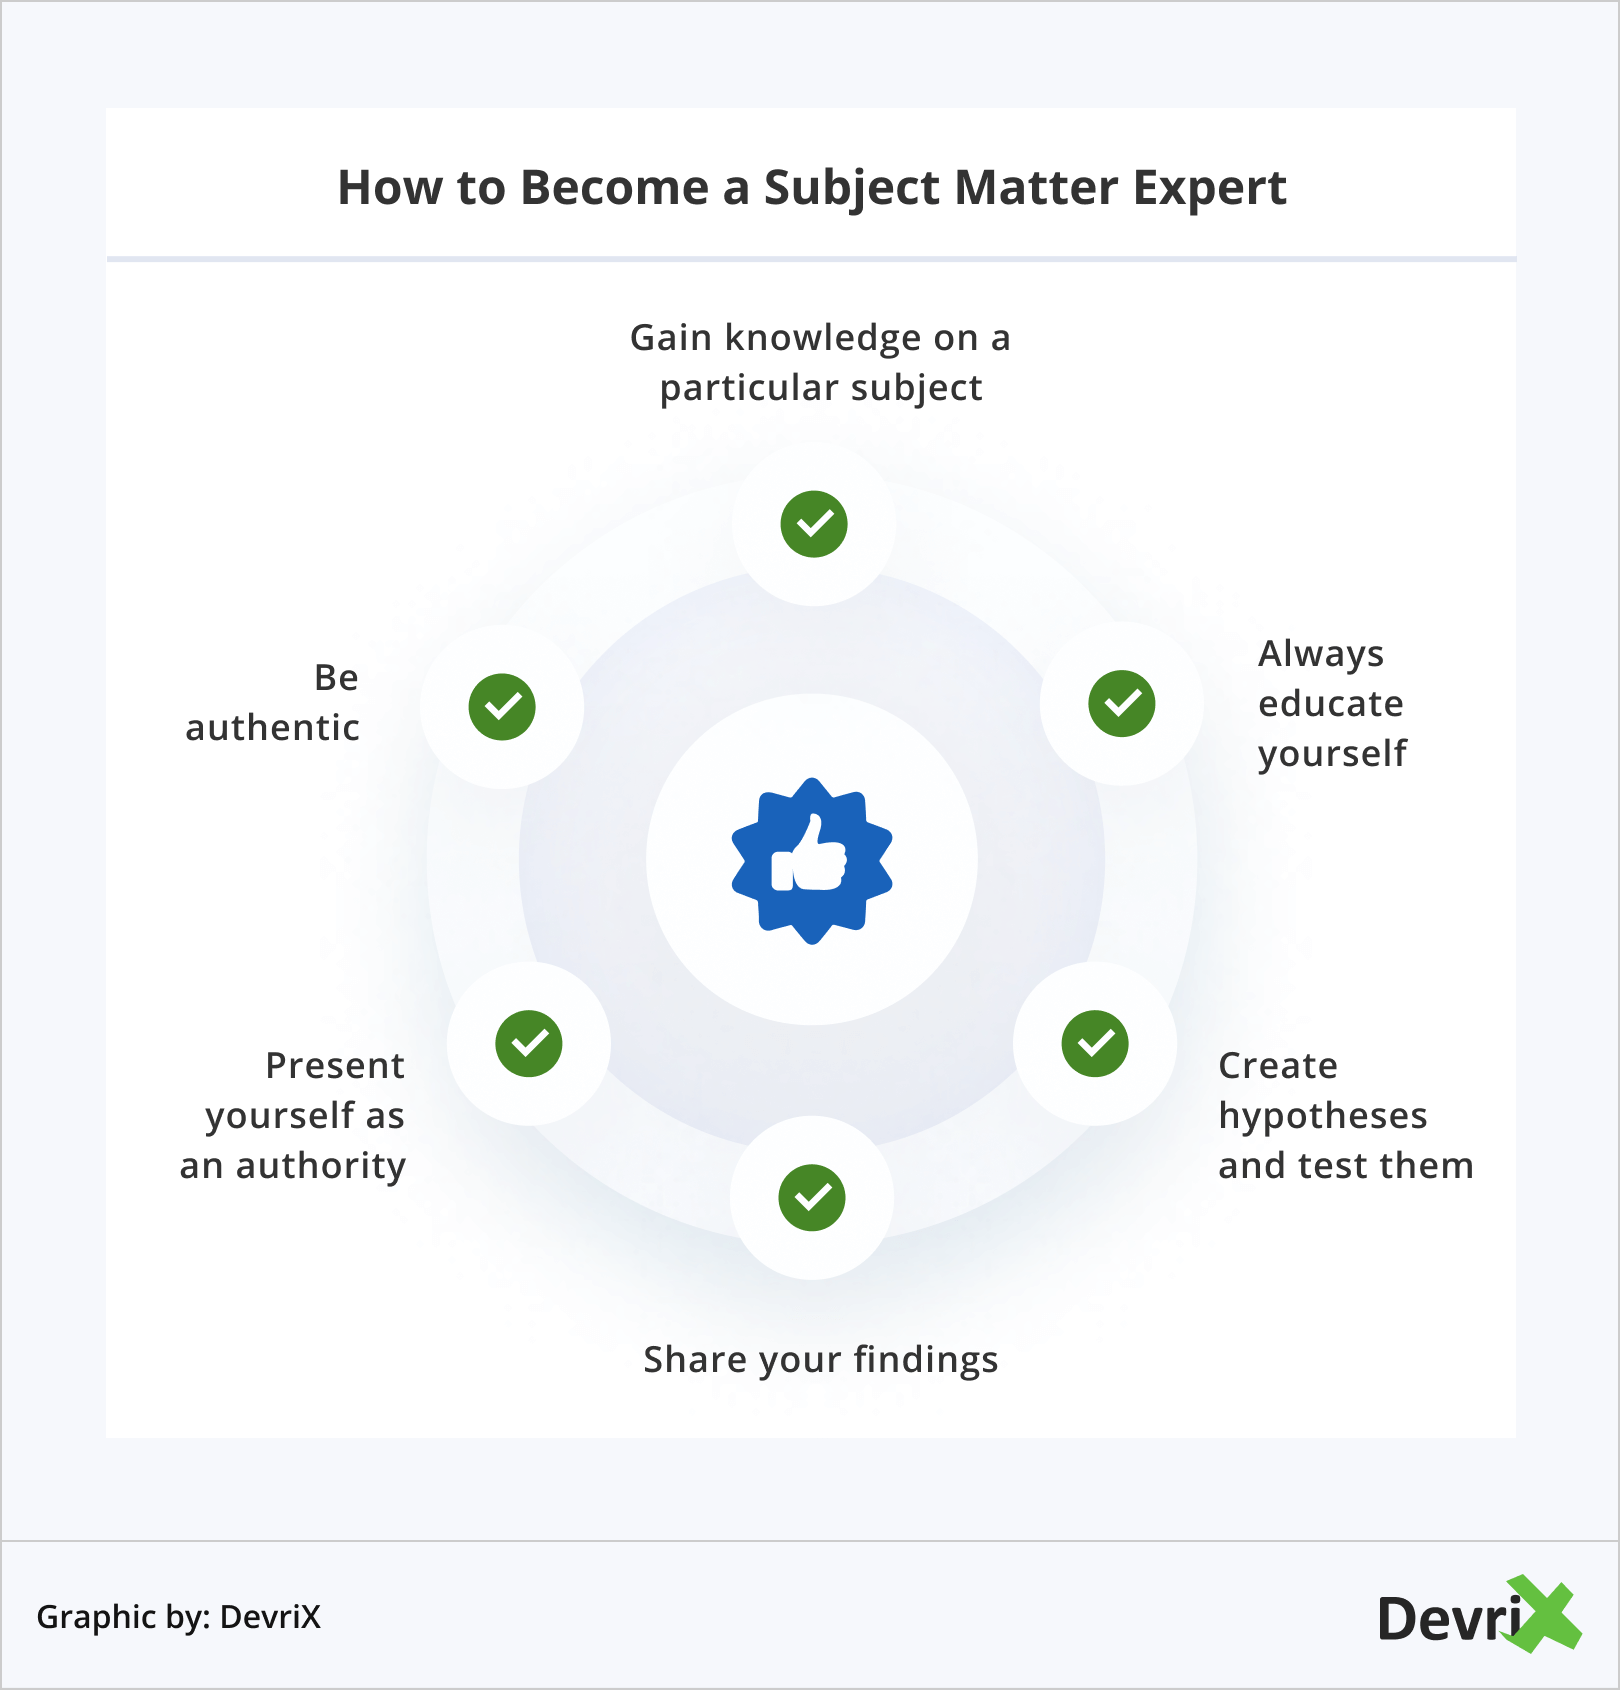 How to Become a Subject Matter Expert